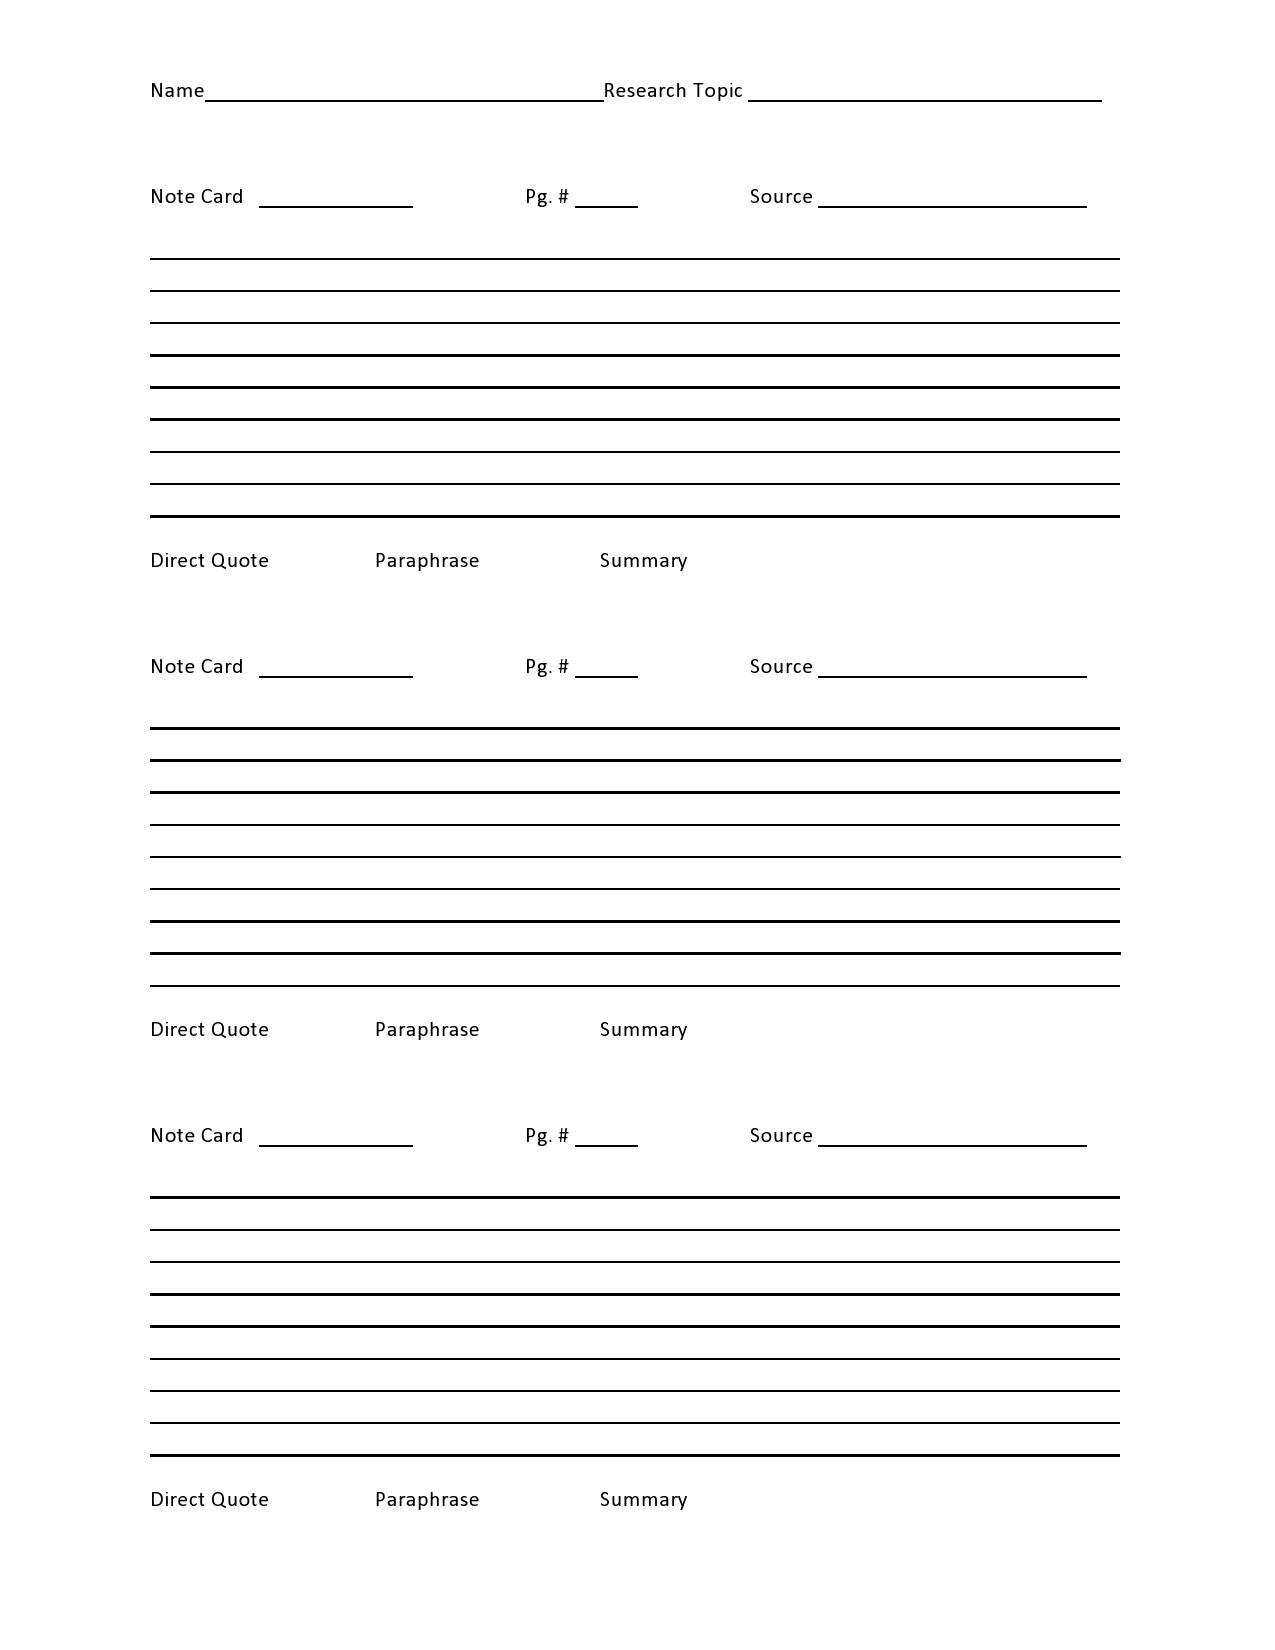 Free note card template 17